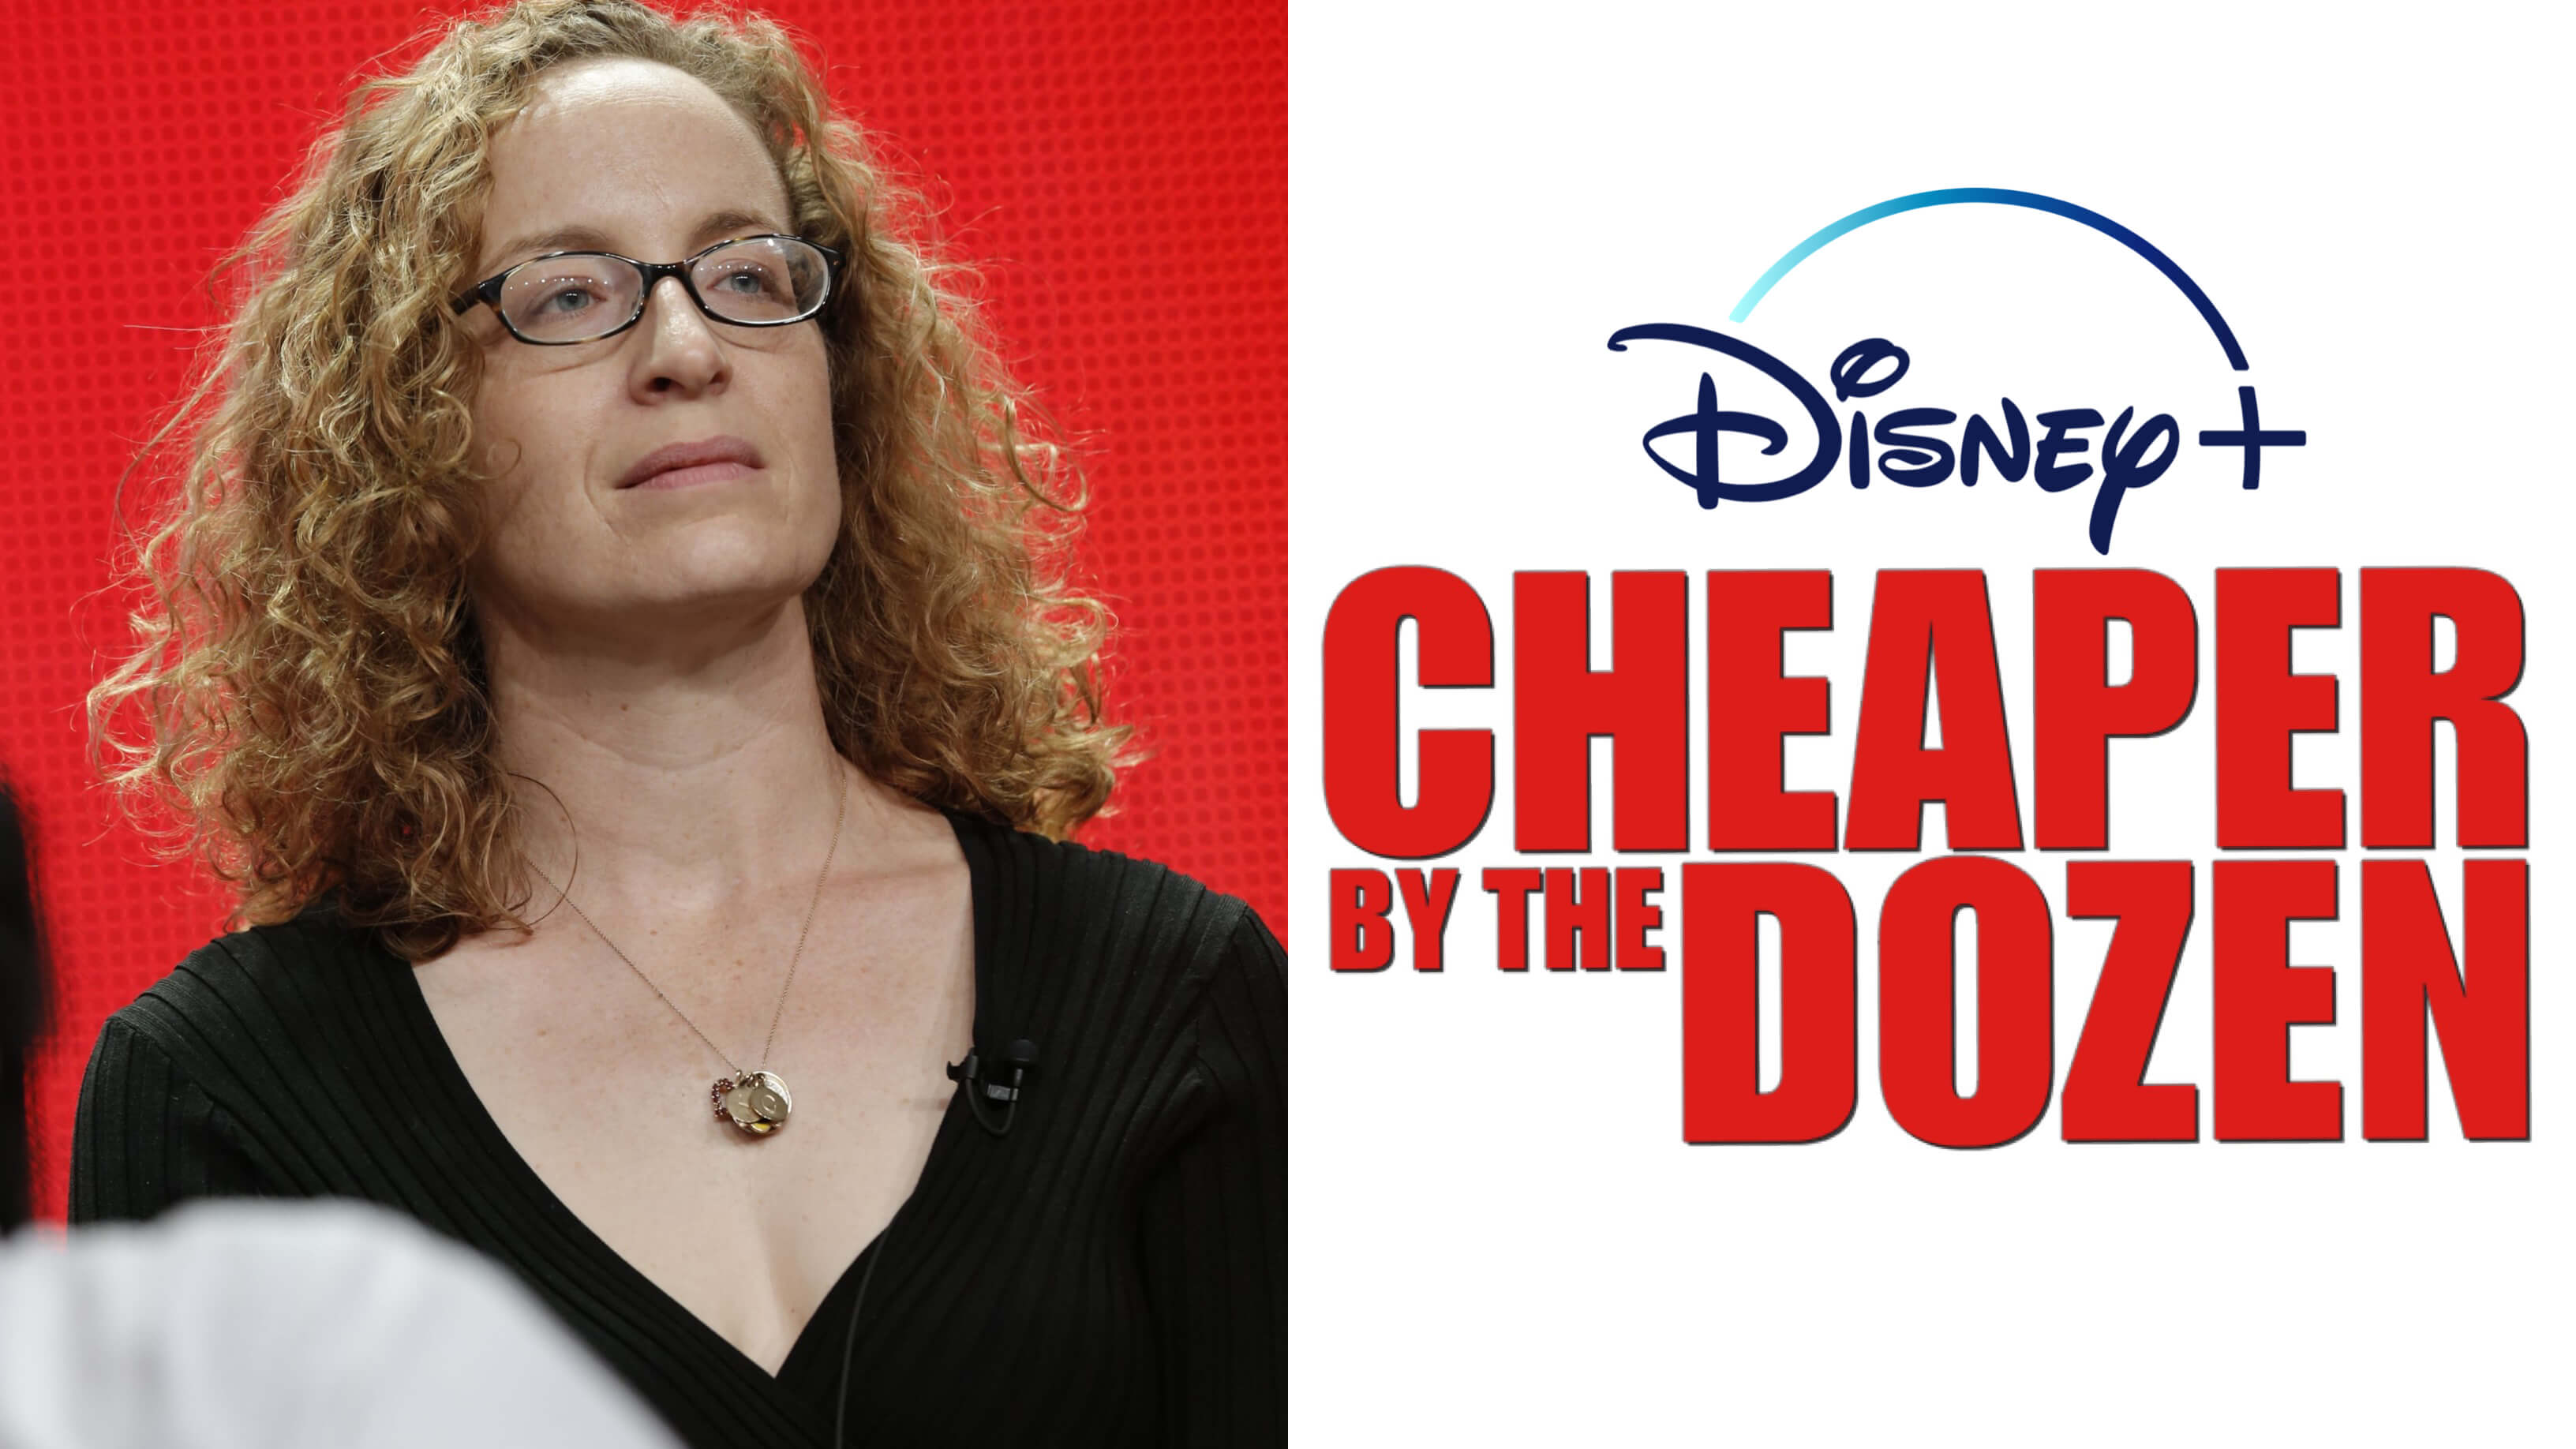 ‘Black-ish’ Producer Gail Lerner To Direct ‘Cheaper by the Dozen’ Reboot For Disney+